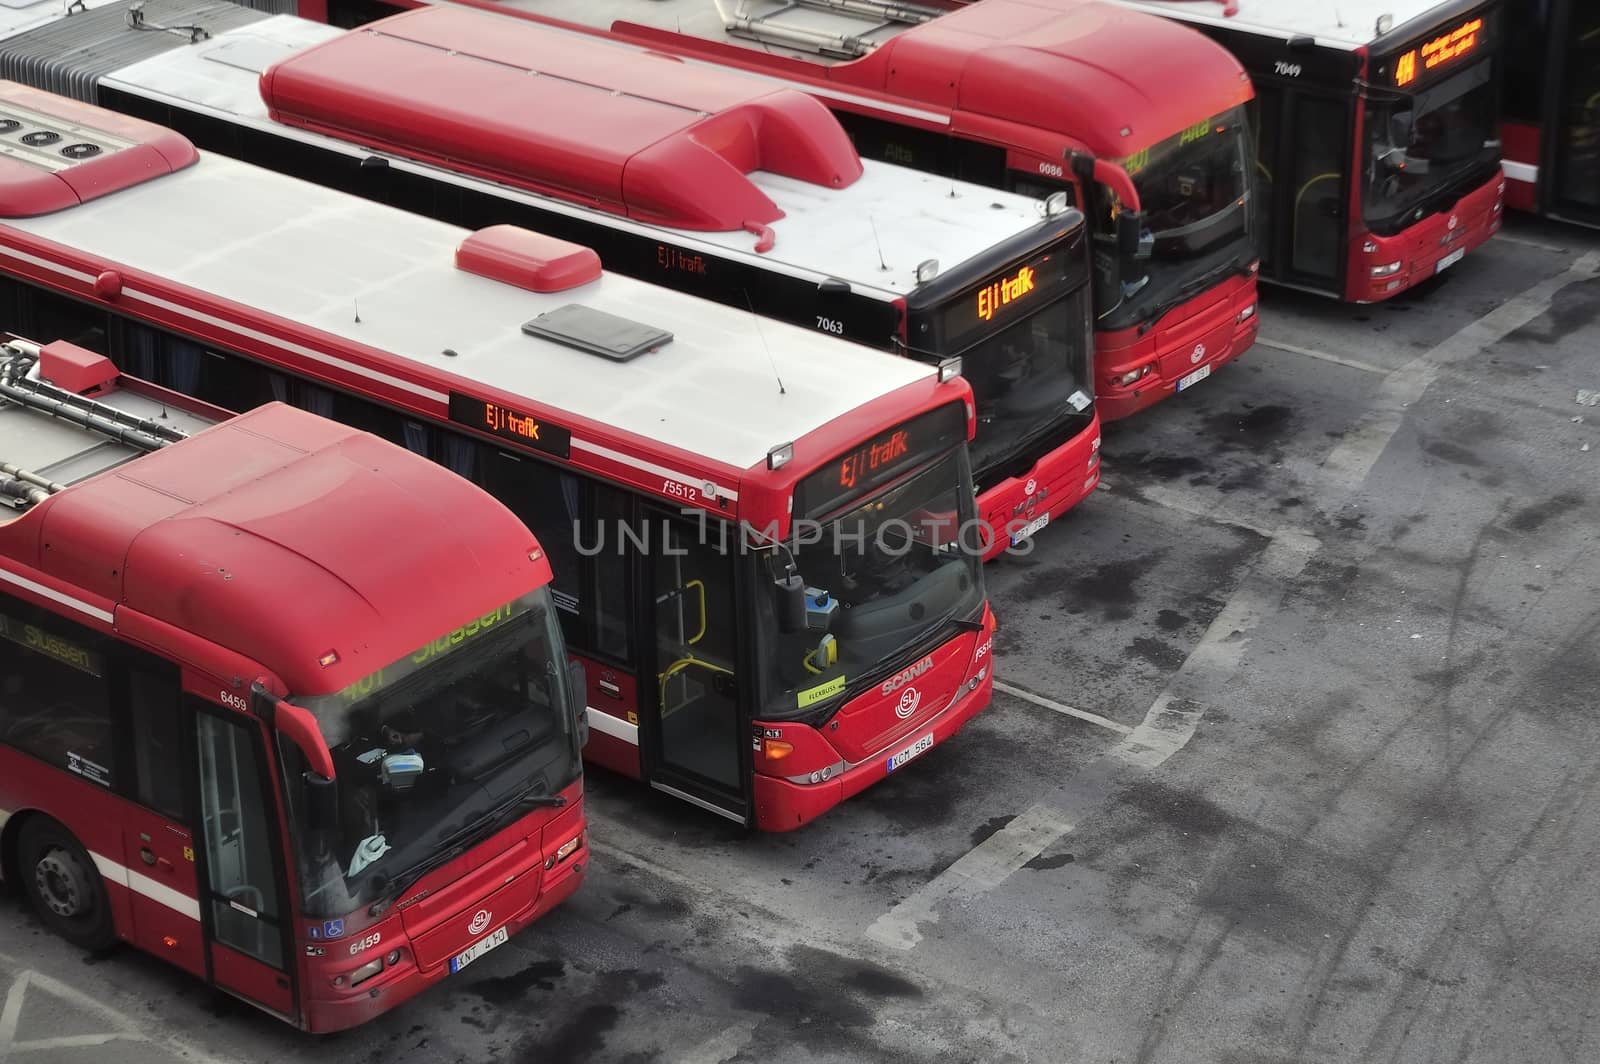 Parked buses by a40757